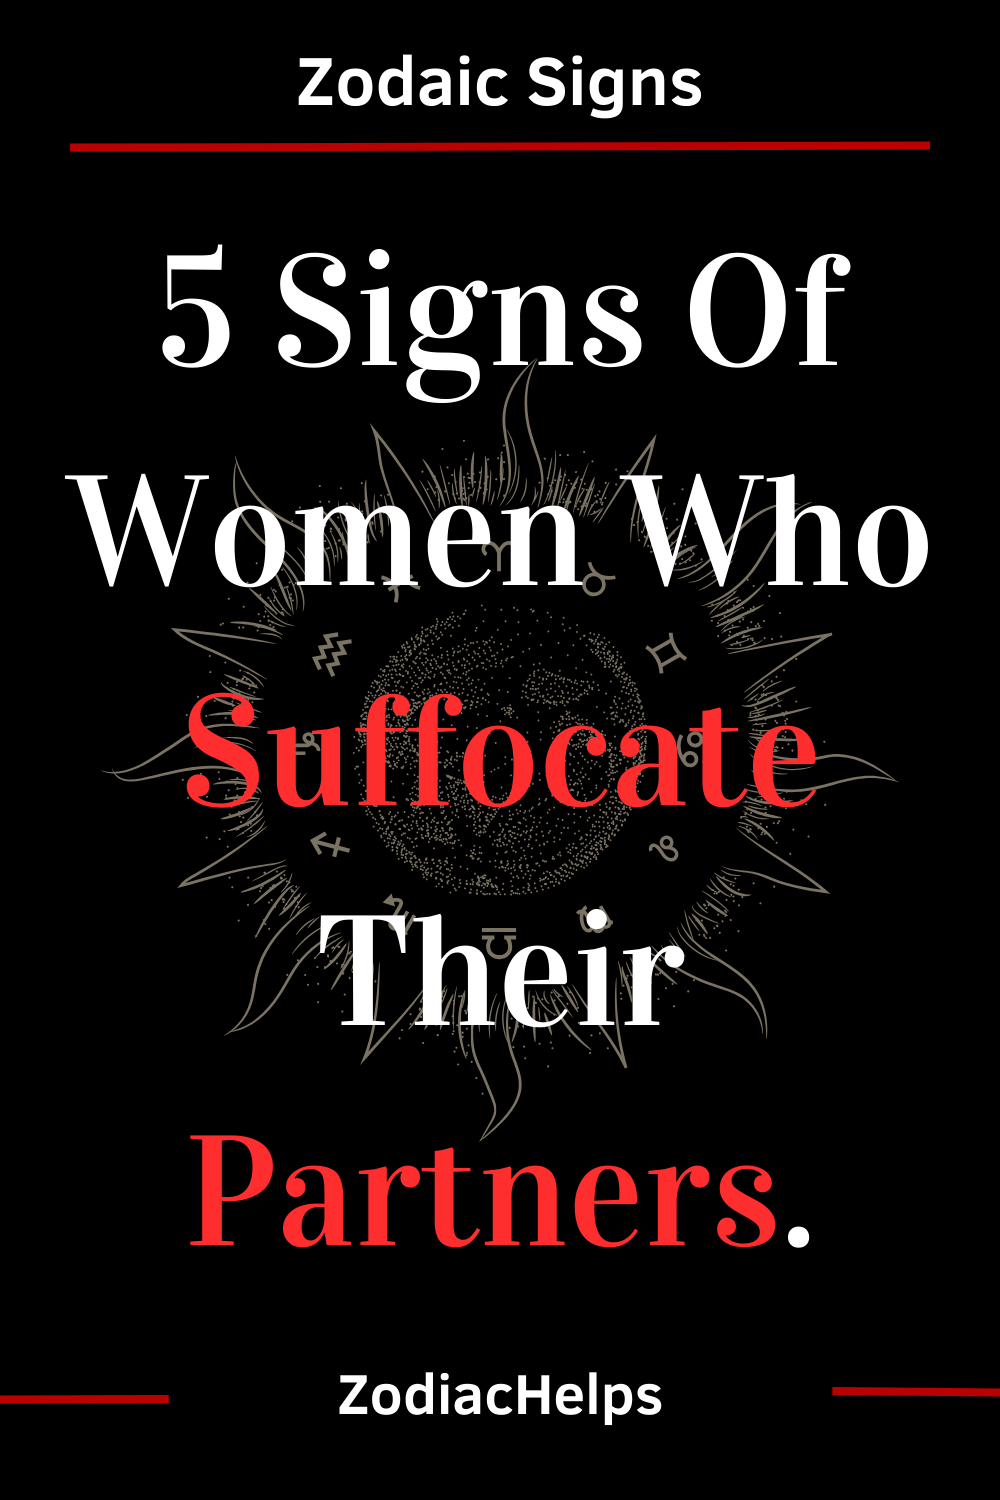 5 Signs Of Women Who Suffocate Their Partners.